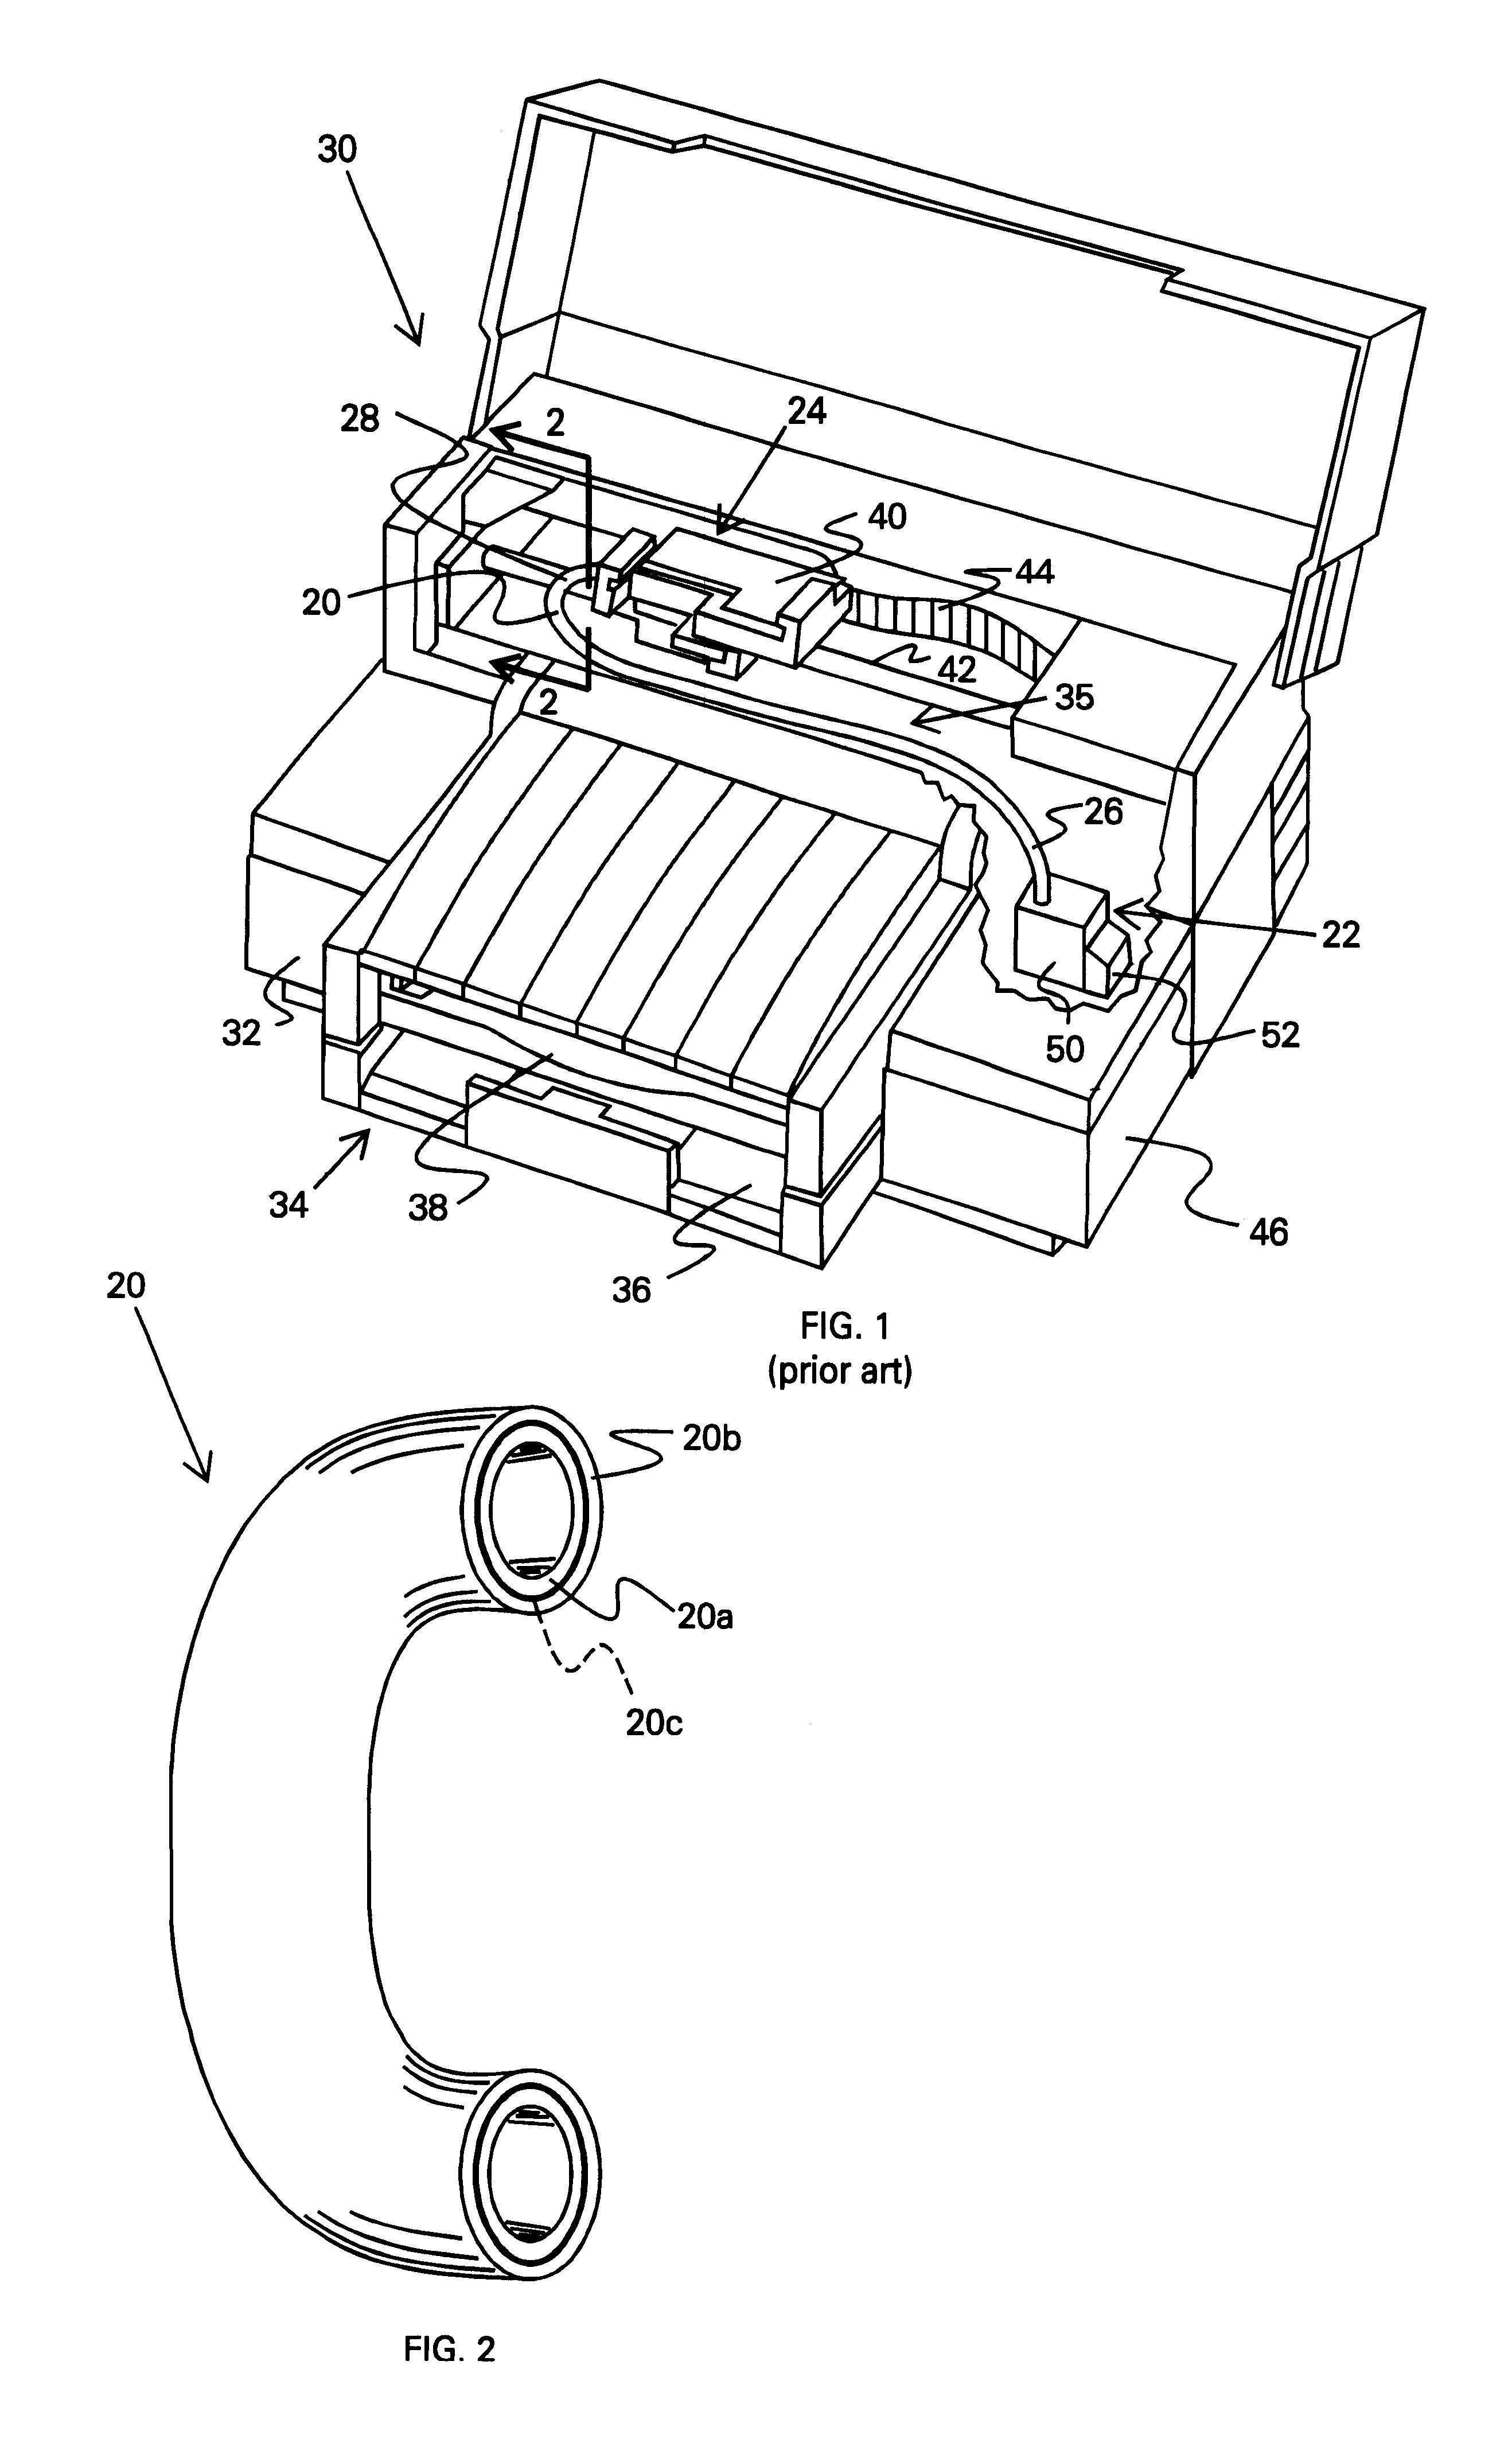 Co-extruded tubing for an off-axis ink delivery system